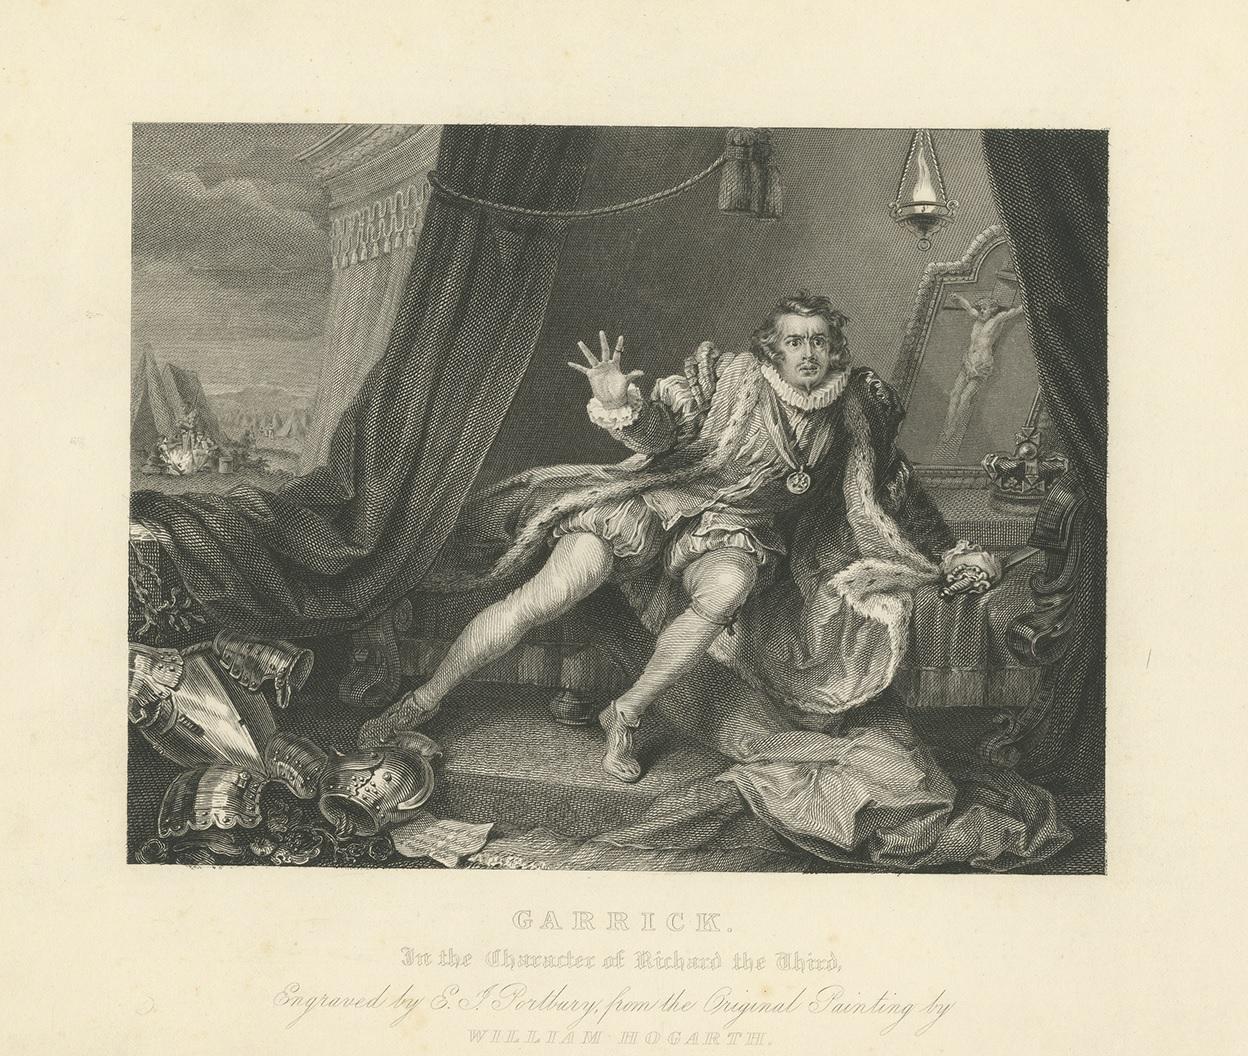 Antique print titled 'Garrick in the Character of Richard the Third'. Old print of David Garrick in the role of Richard III, made after a painting by William Hogarth. Hogarth represents his close friend, the actor David Garrick, as Richard III